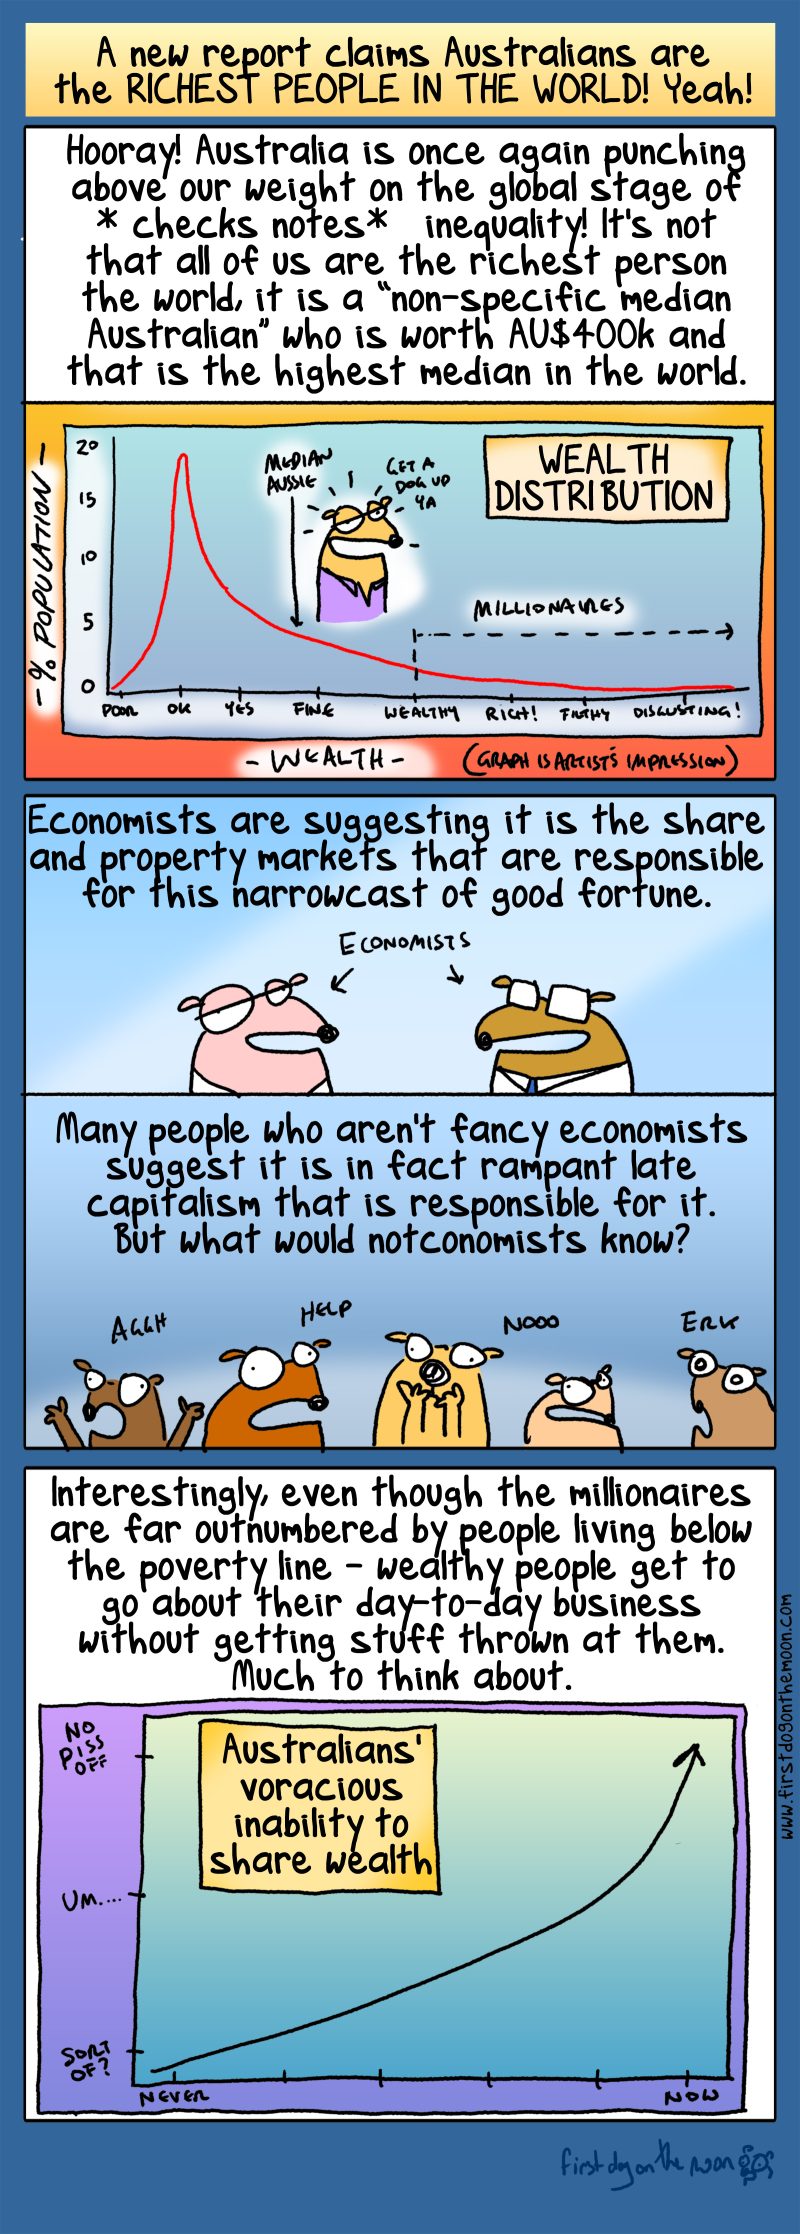 Woohoo! Australia is punching above its weight in *checks notes* inequality!